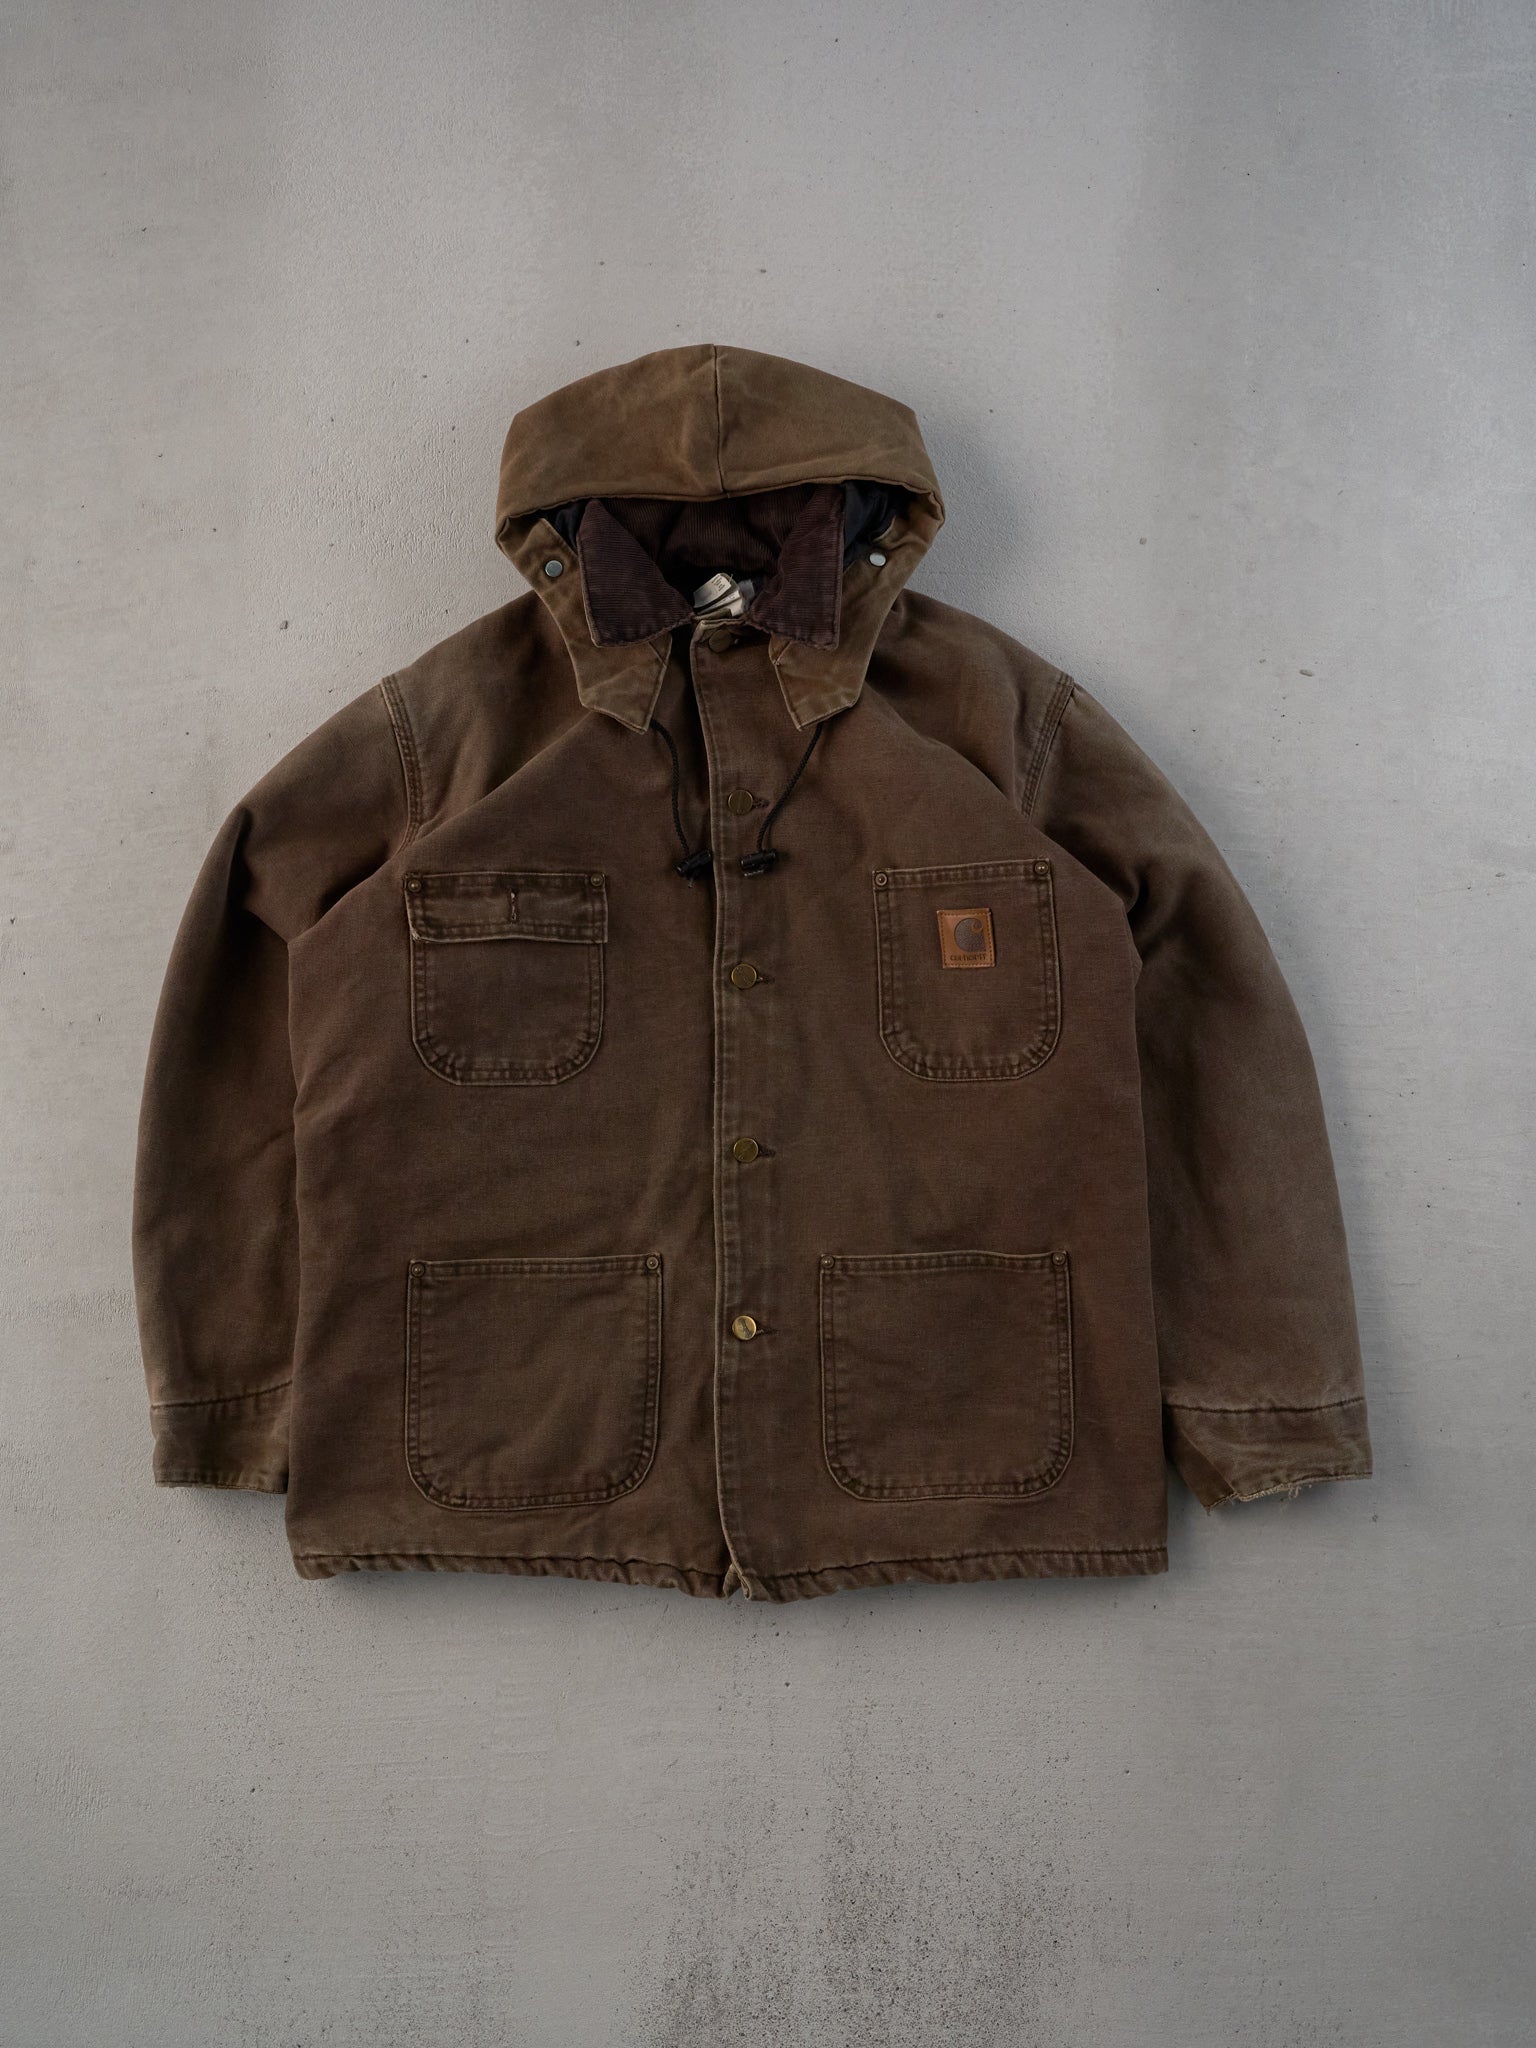 Vintage 90s Rare Brown Carhartt Workwear Utility Jacket With Hood (L)